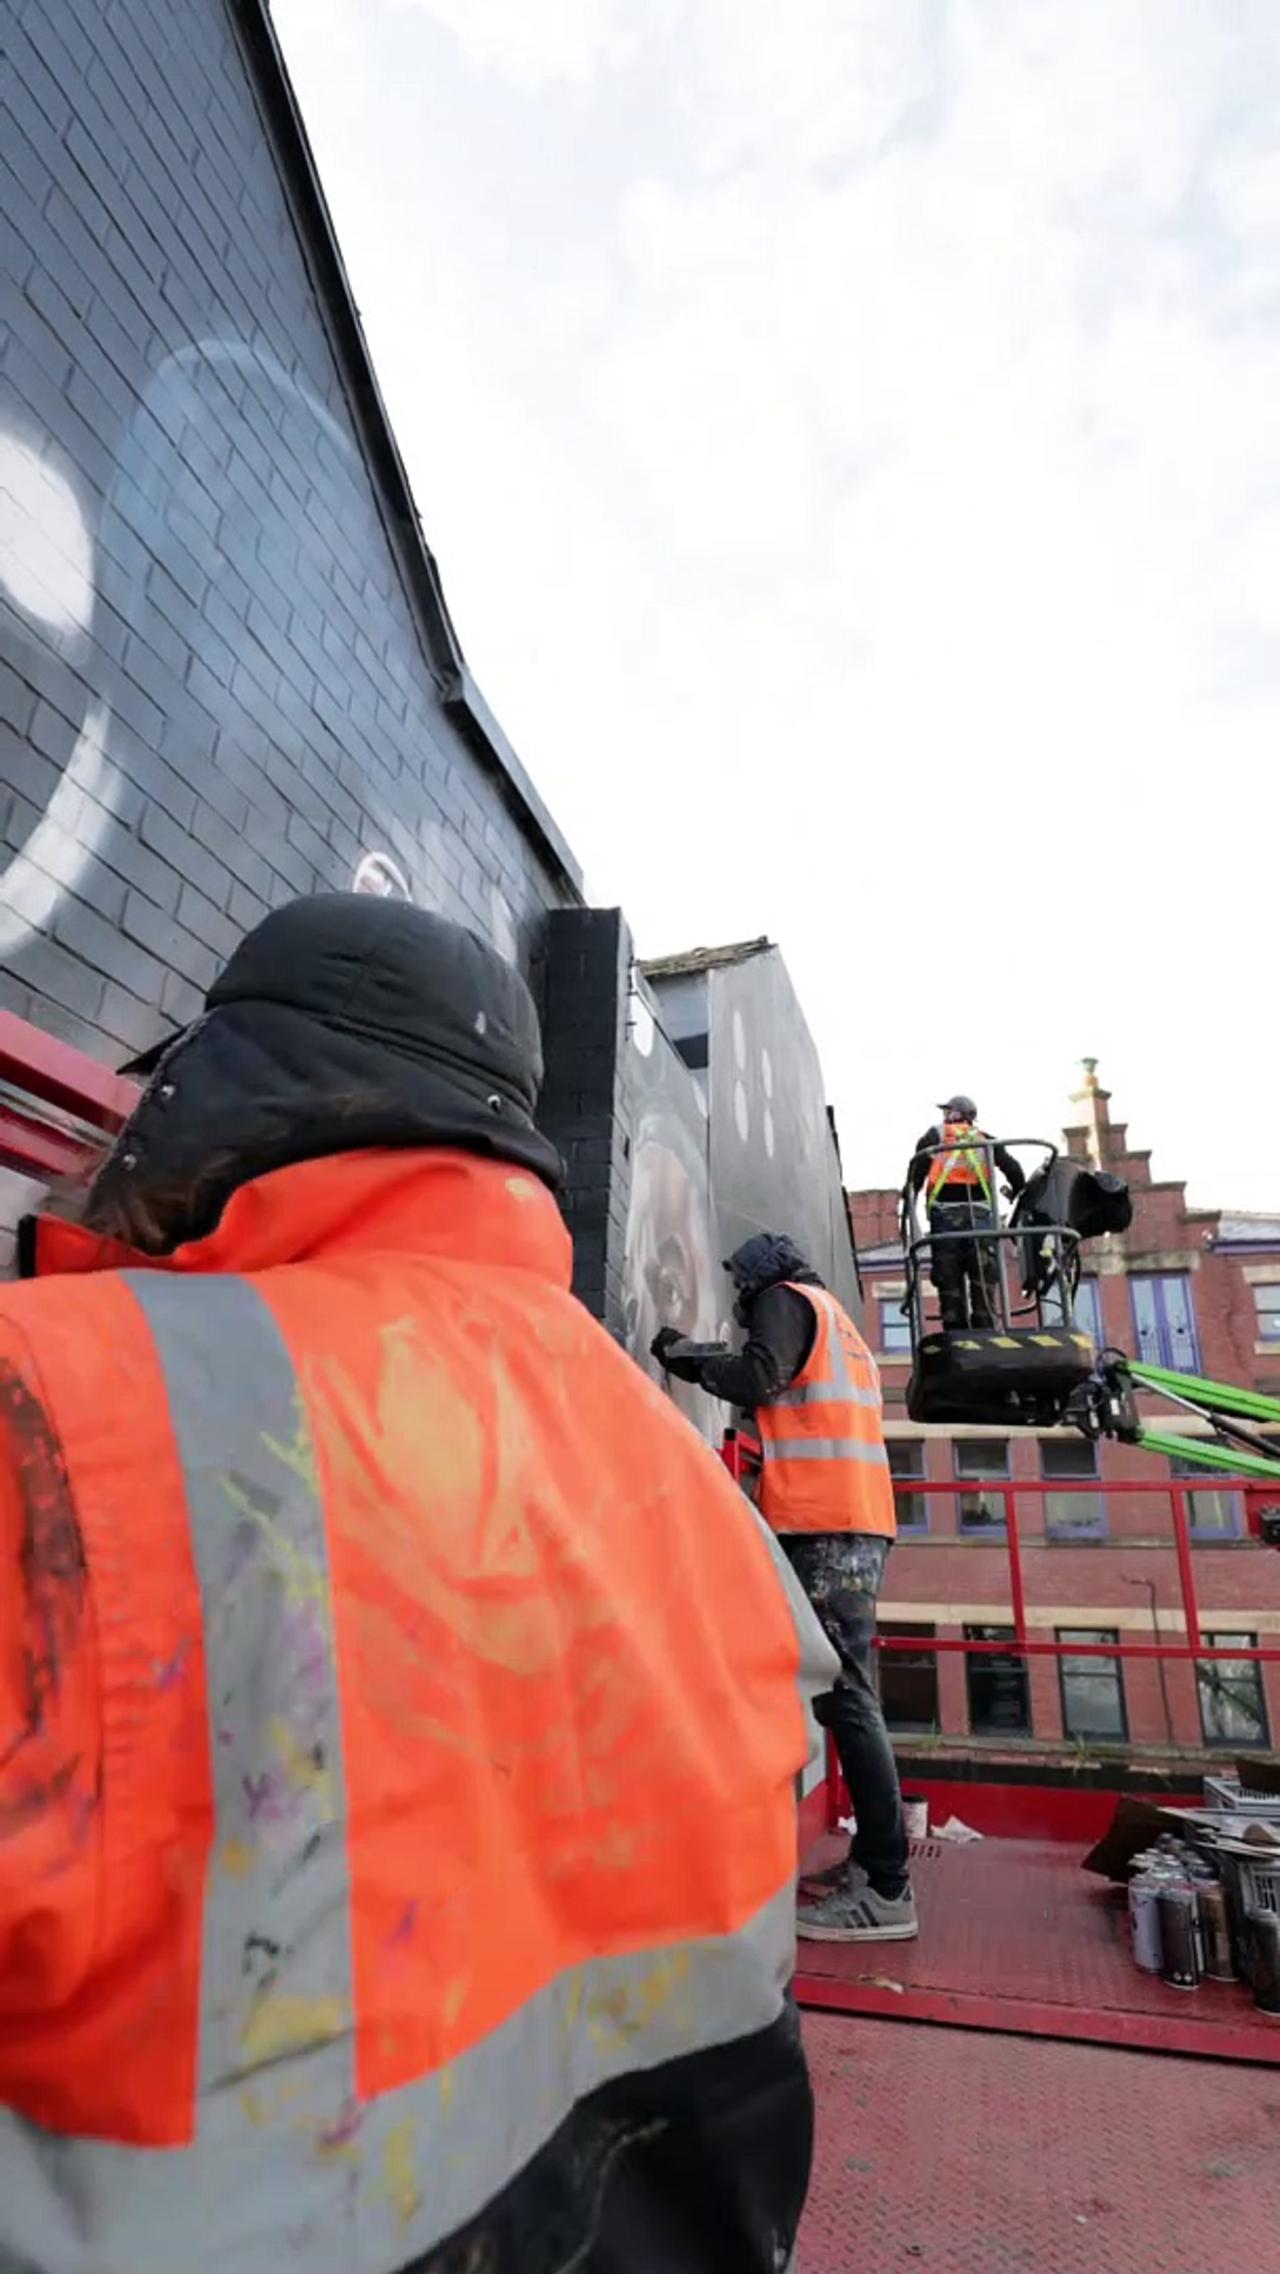 Creed 3 Movie - Manchester Mural & Ireland